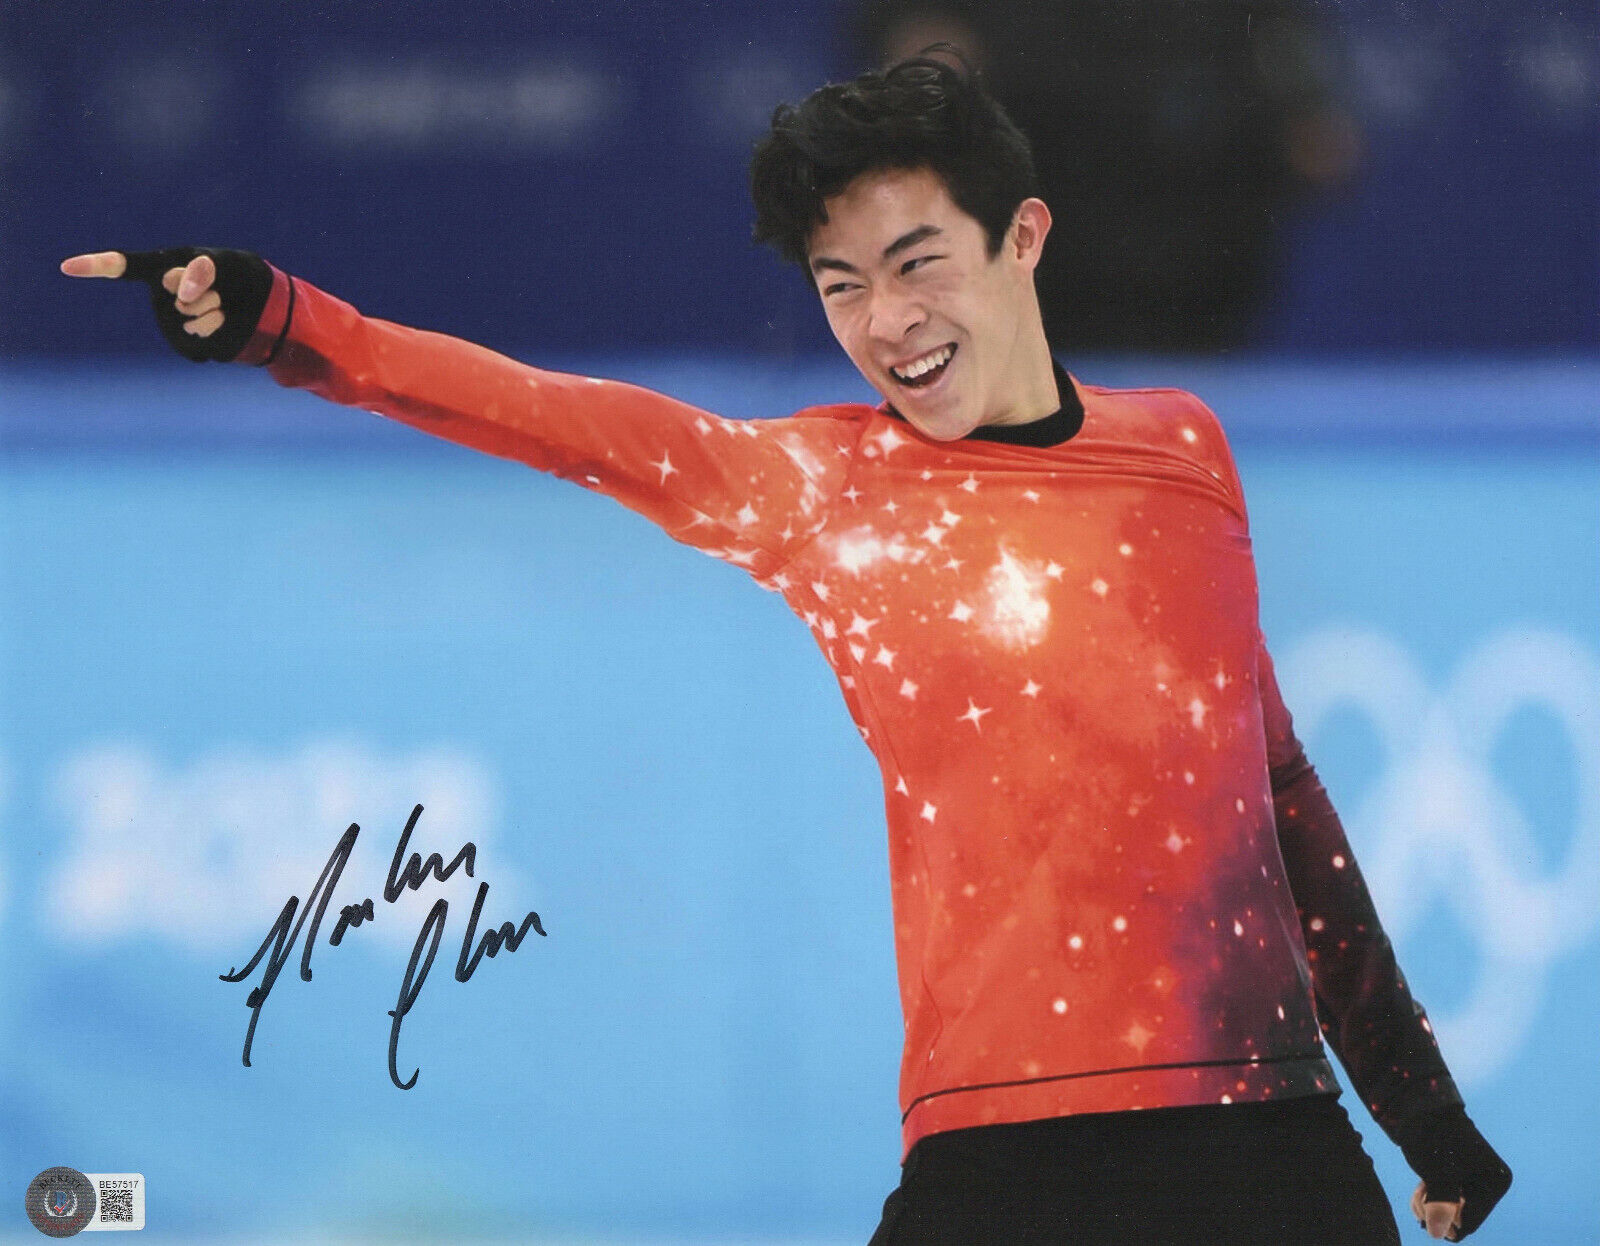 USA OLYMPIC FIGURE SKATER NATHAN CHEN SIGNED AUTOGRAPH 11x14 PHOTO BAS BECKETT 